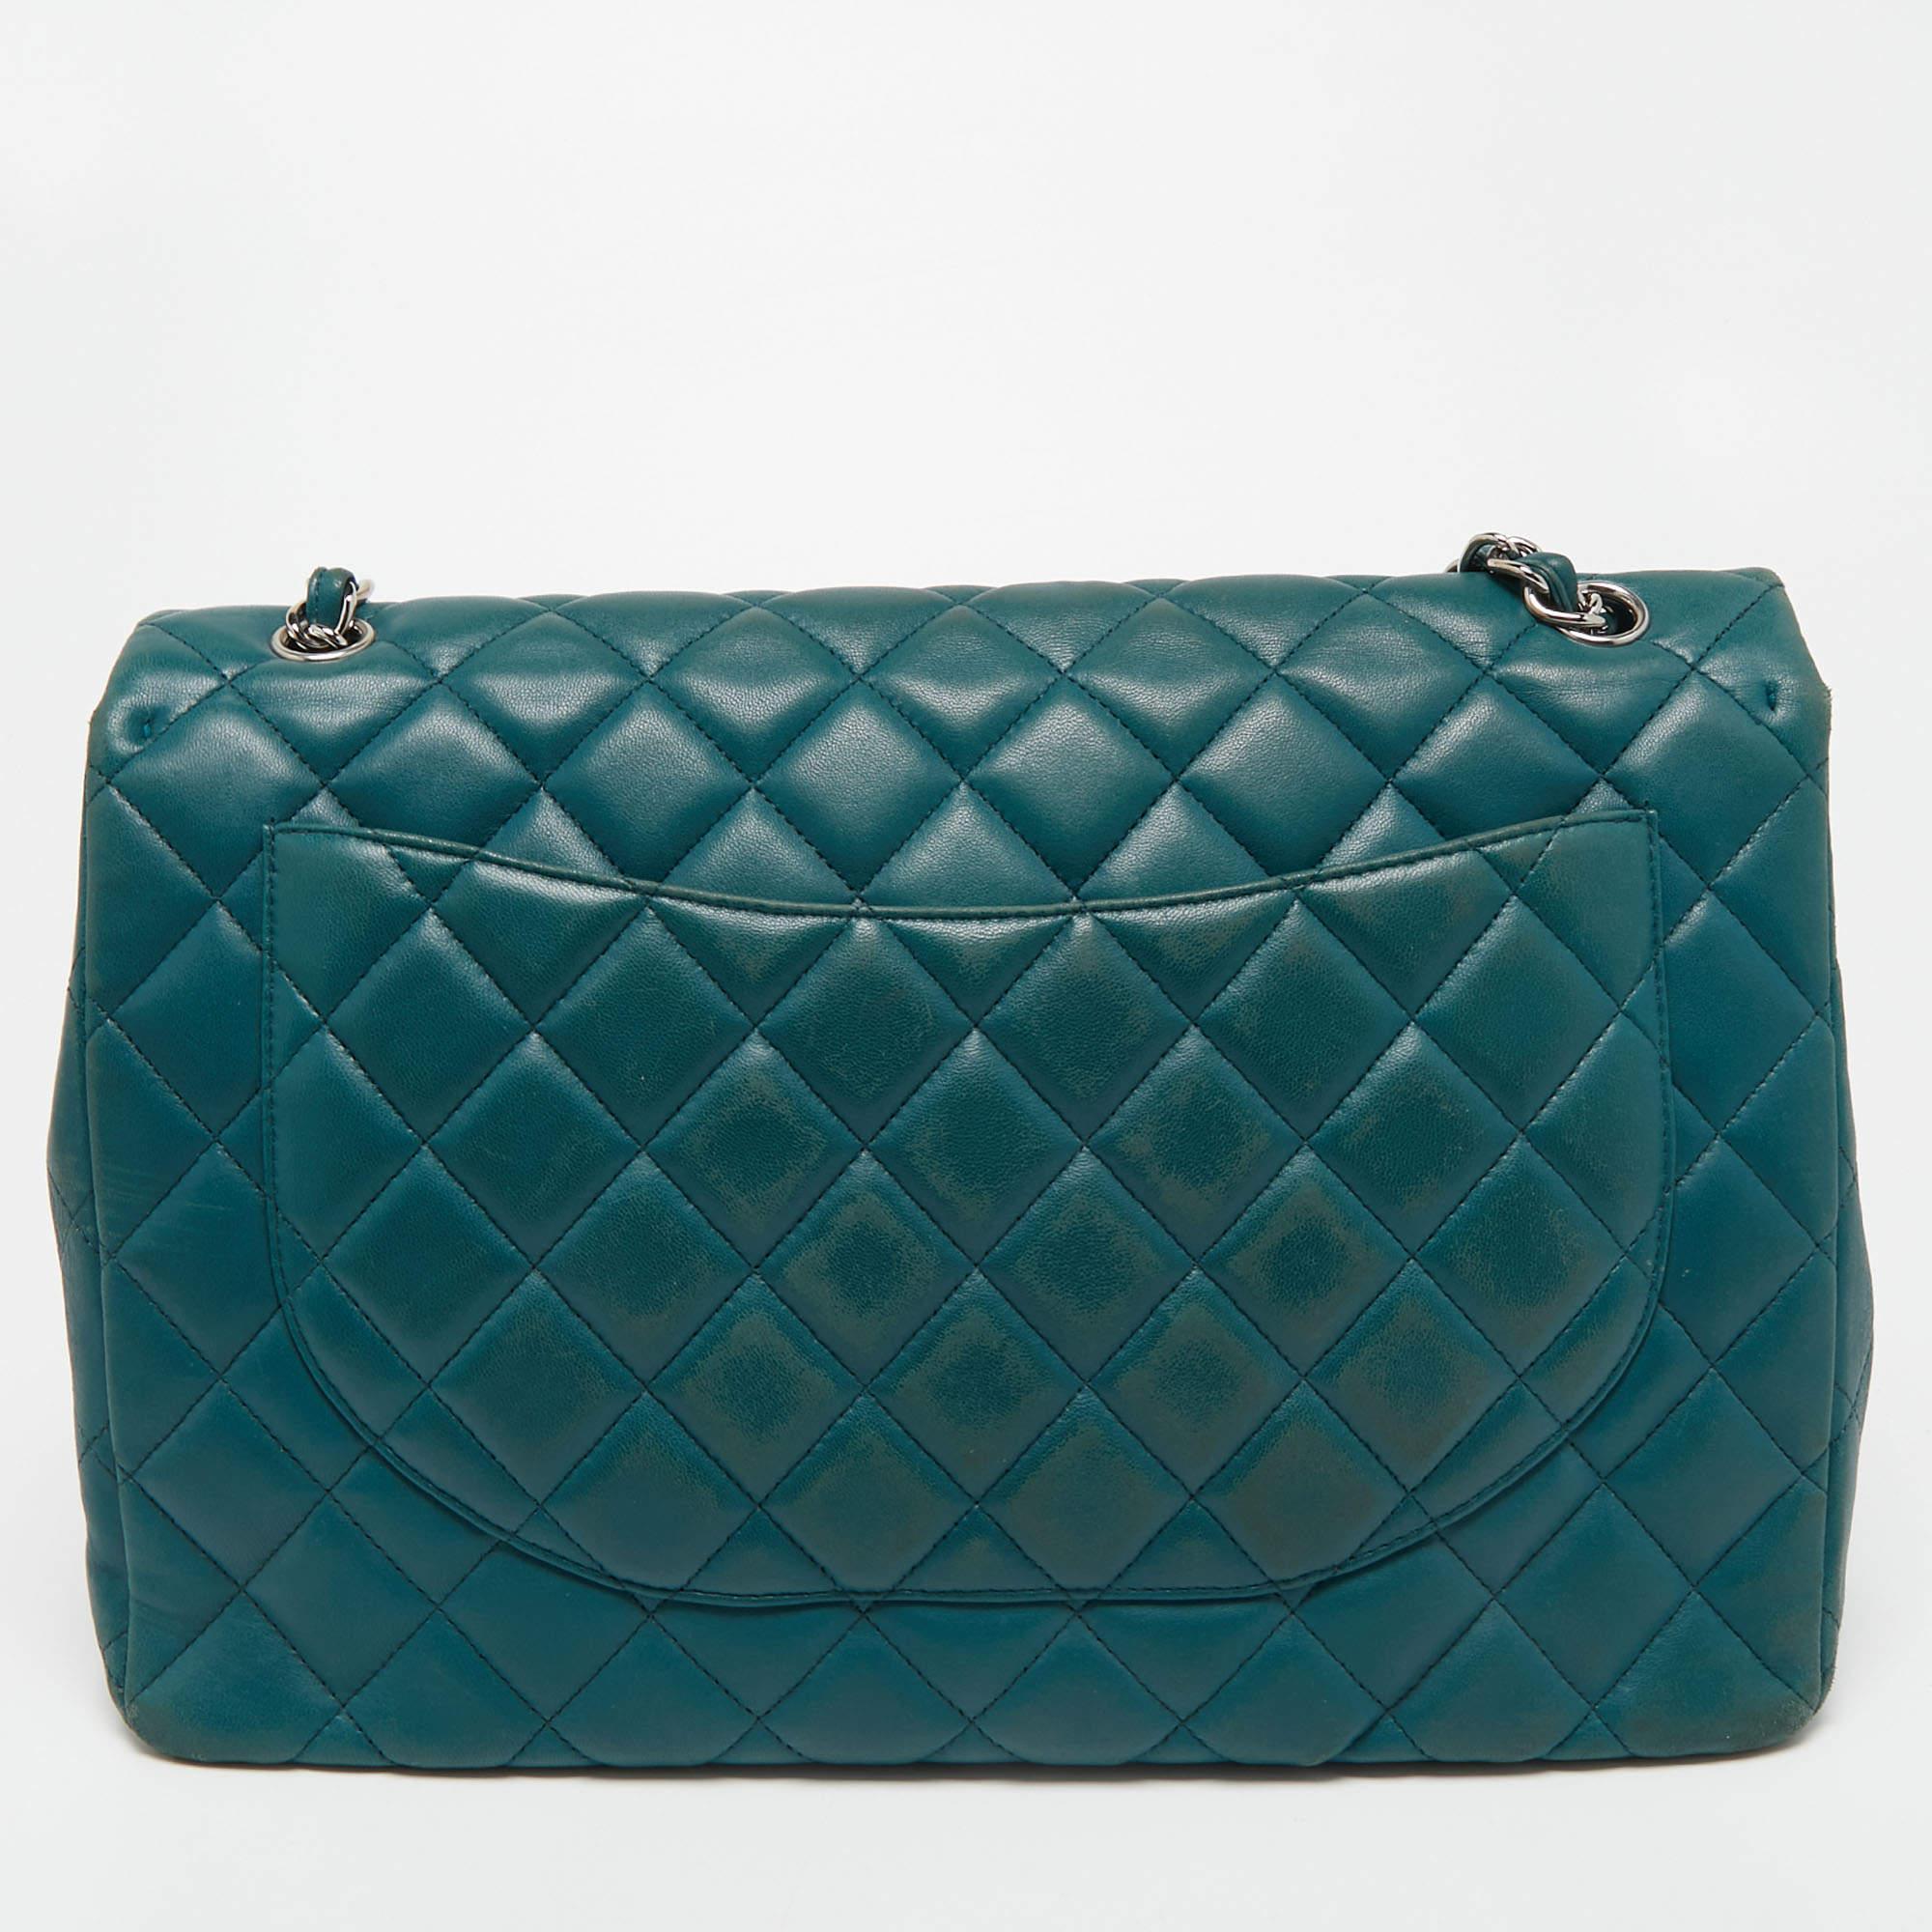 Chanel Teal Blue Quilted Leather Maxi Classic Single Flap Shoulder Bag 11